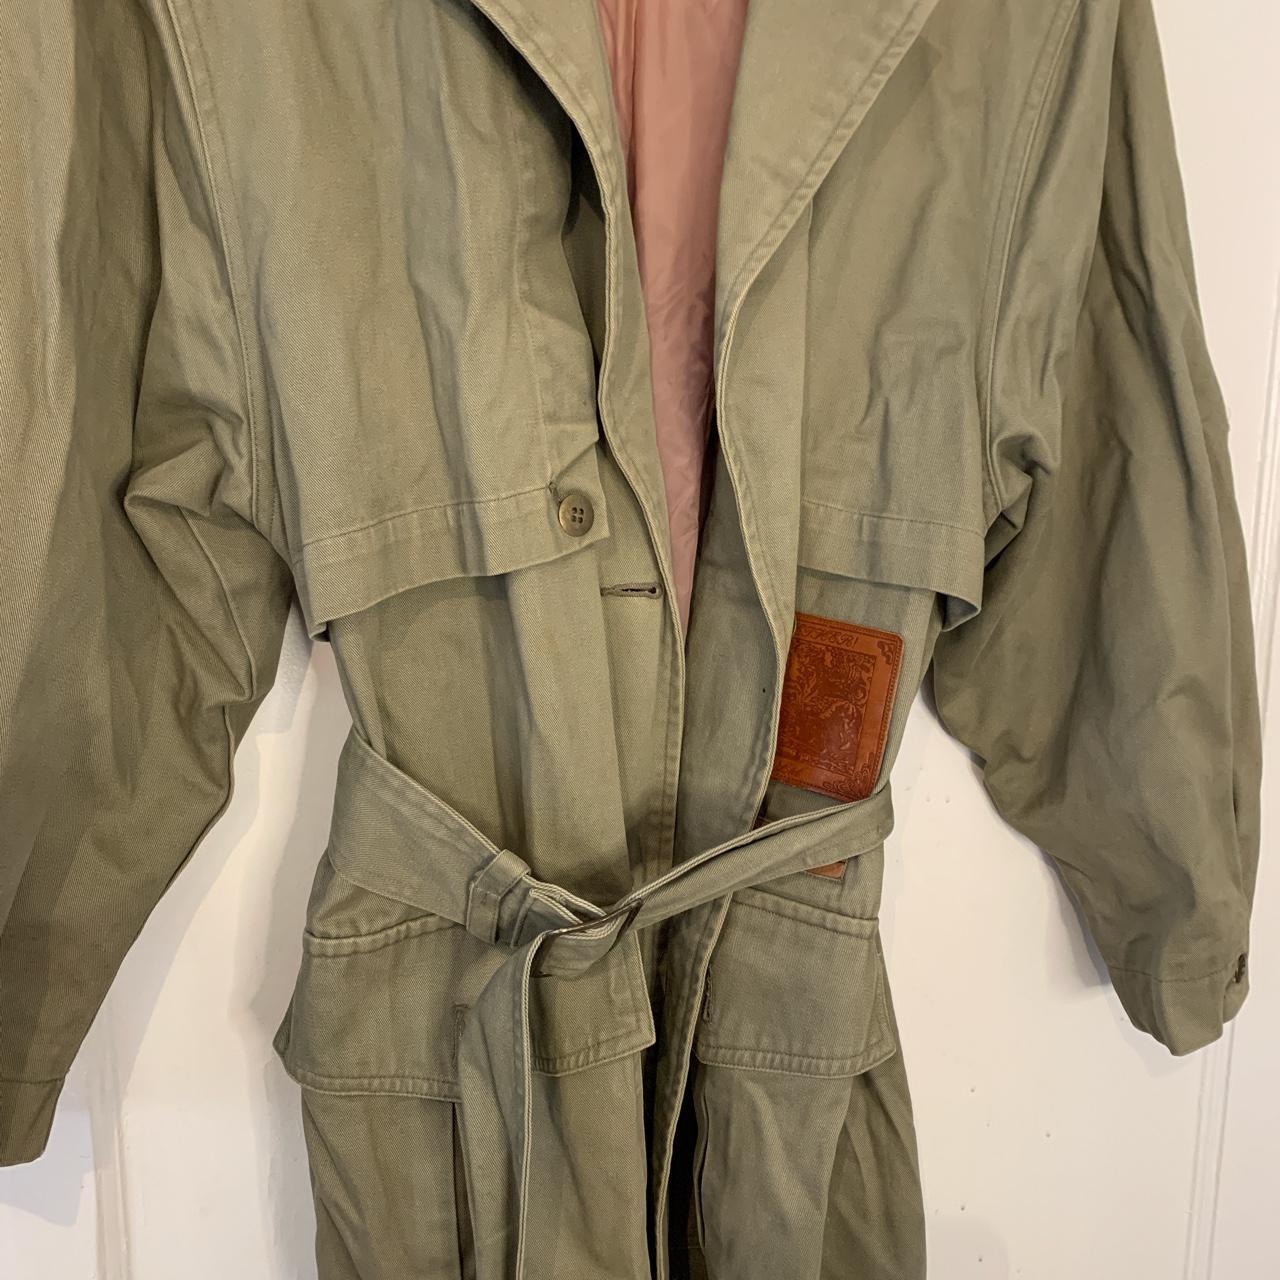 Product Image 4 - Vintage women's trenchcoat with belt.